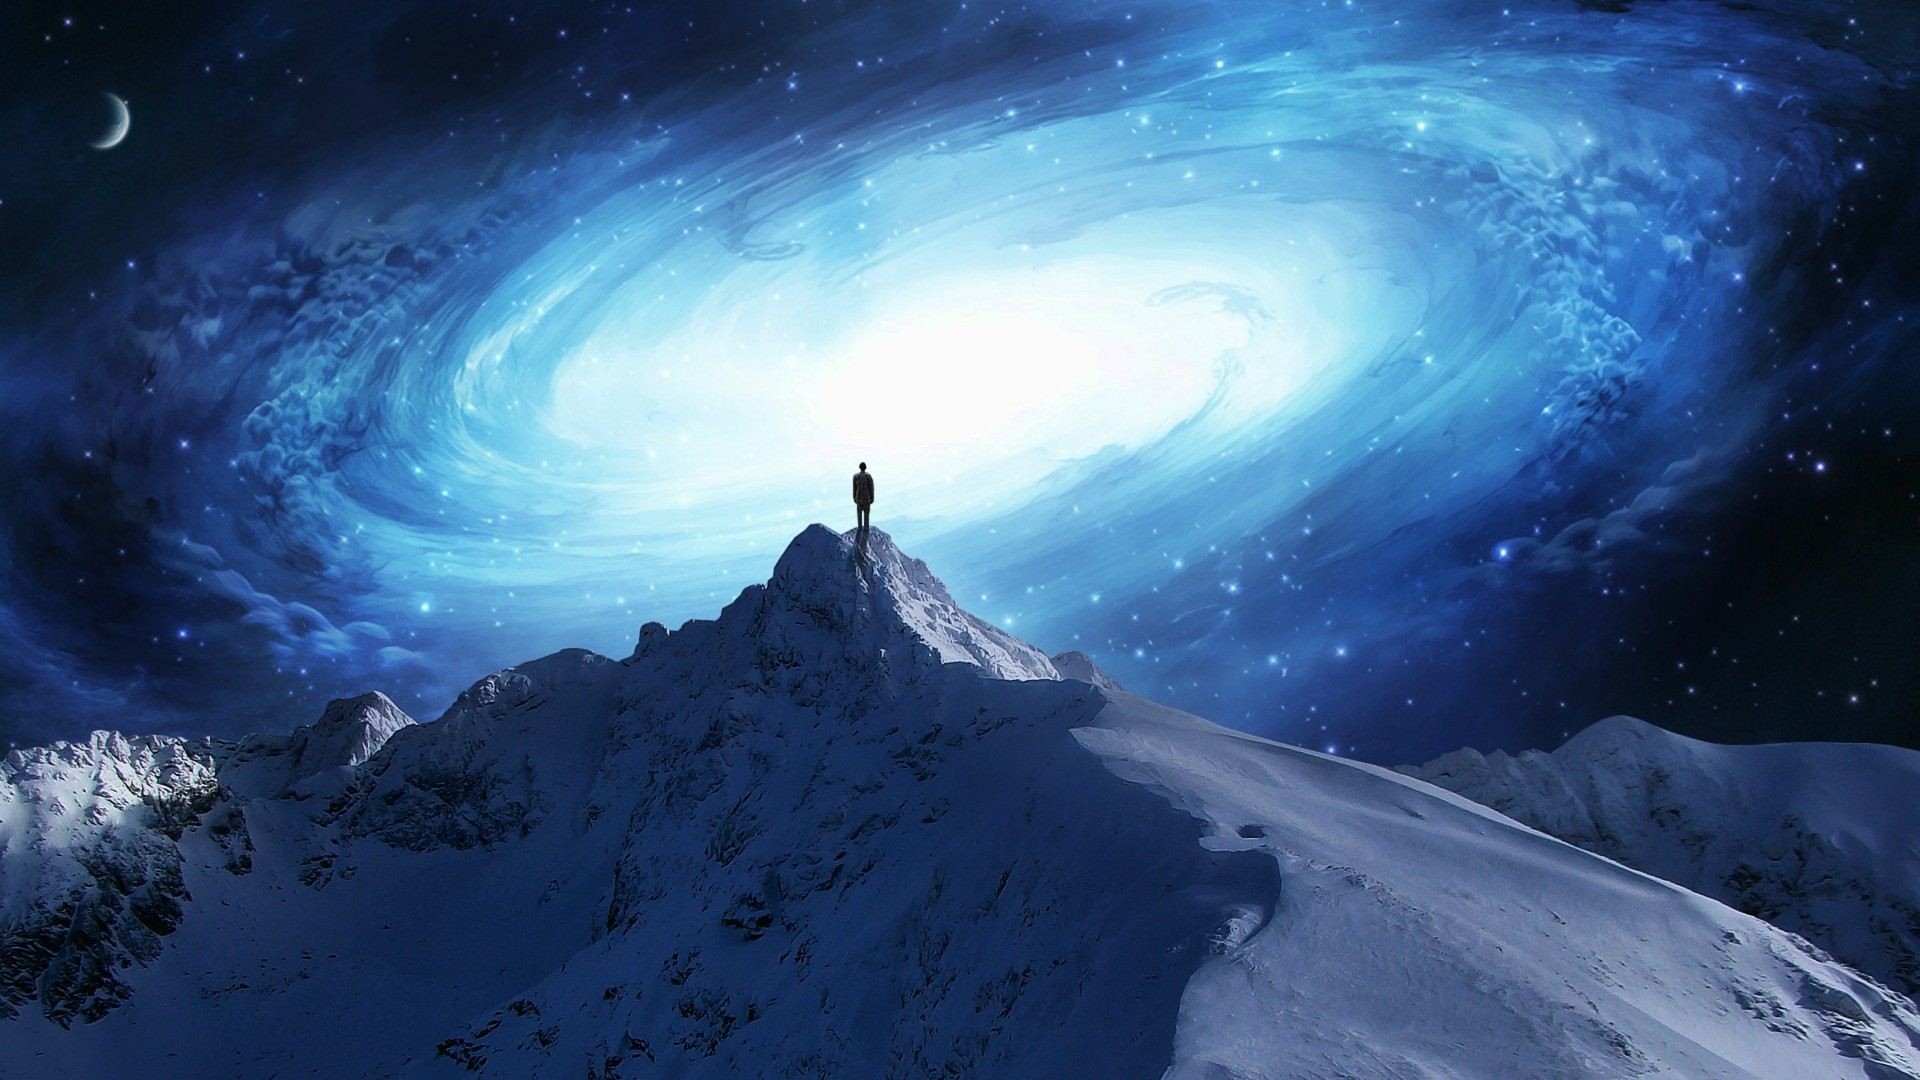 1920x1080 Spiral Galaxy Over Mountains #wallpaper #space #galaxy #trippy